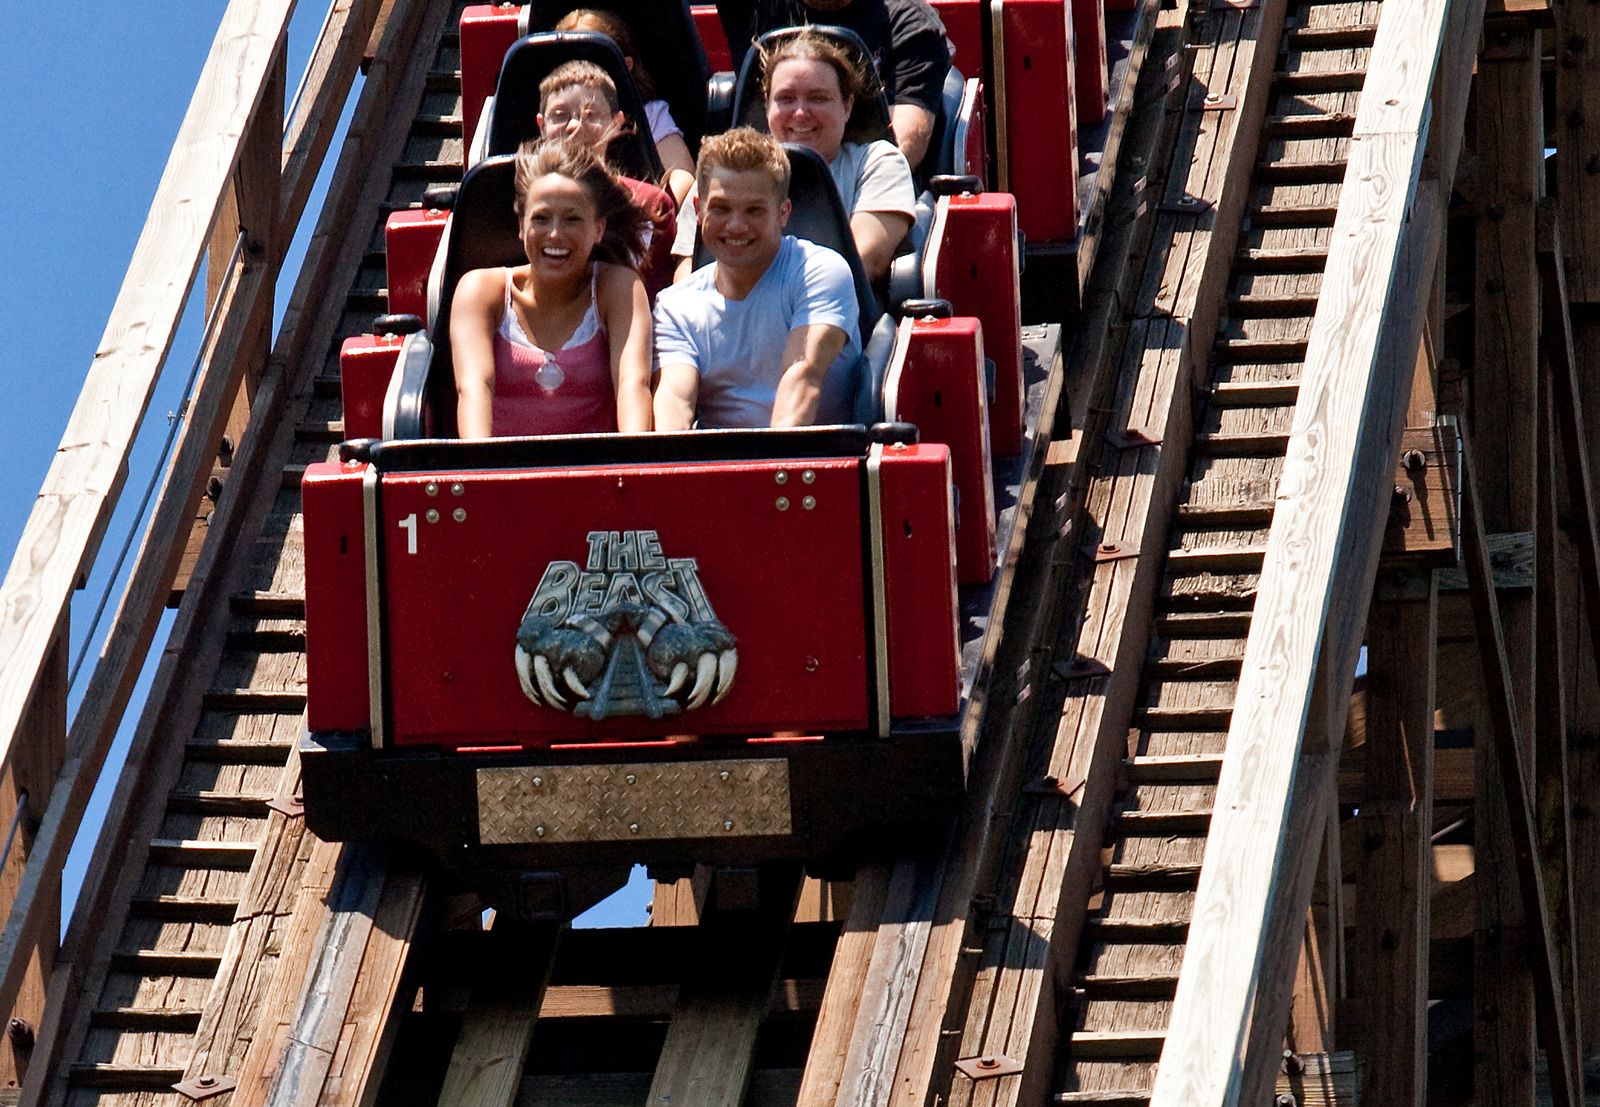 What a ride: Wooden roller coasters